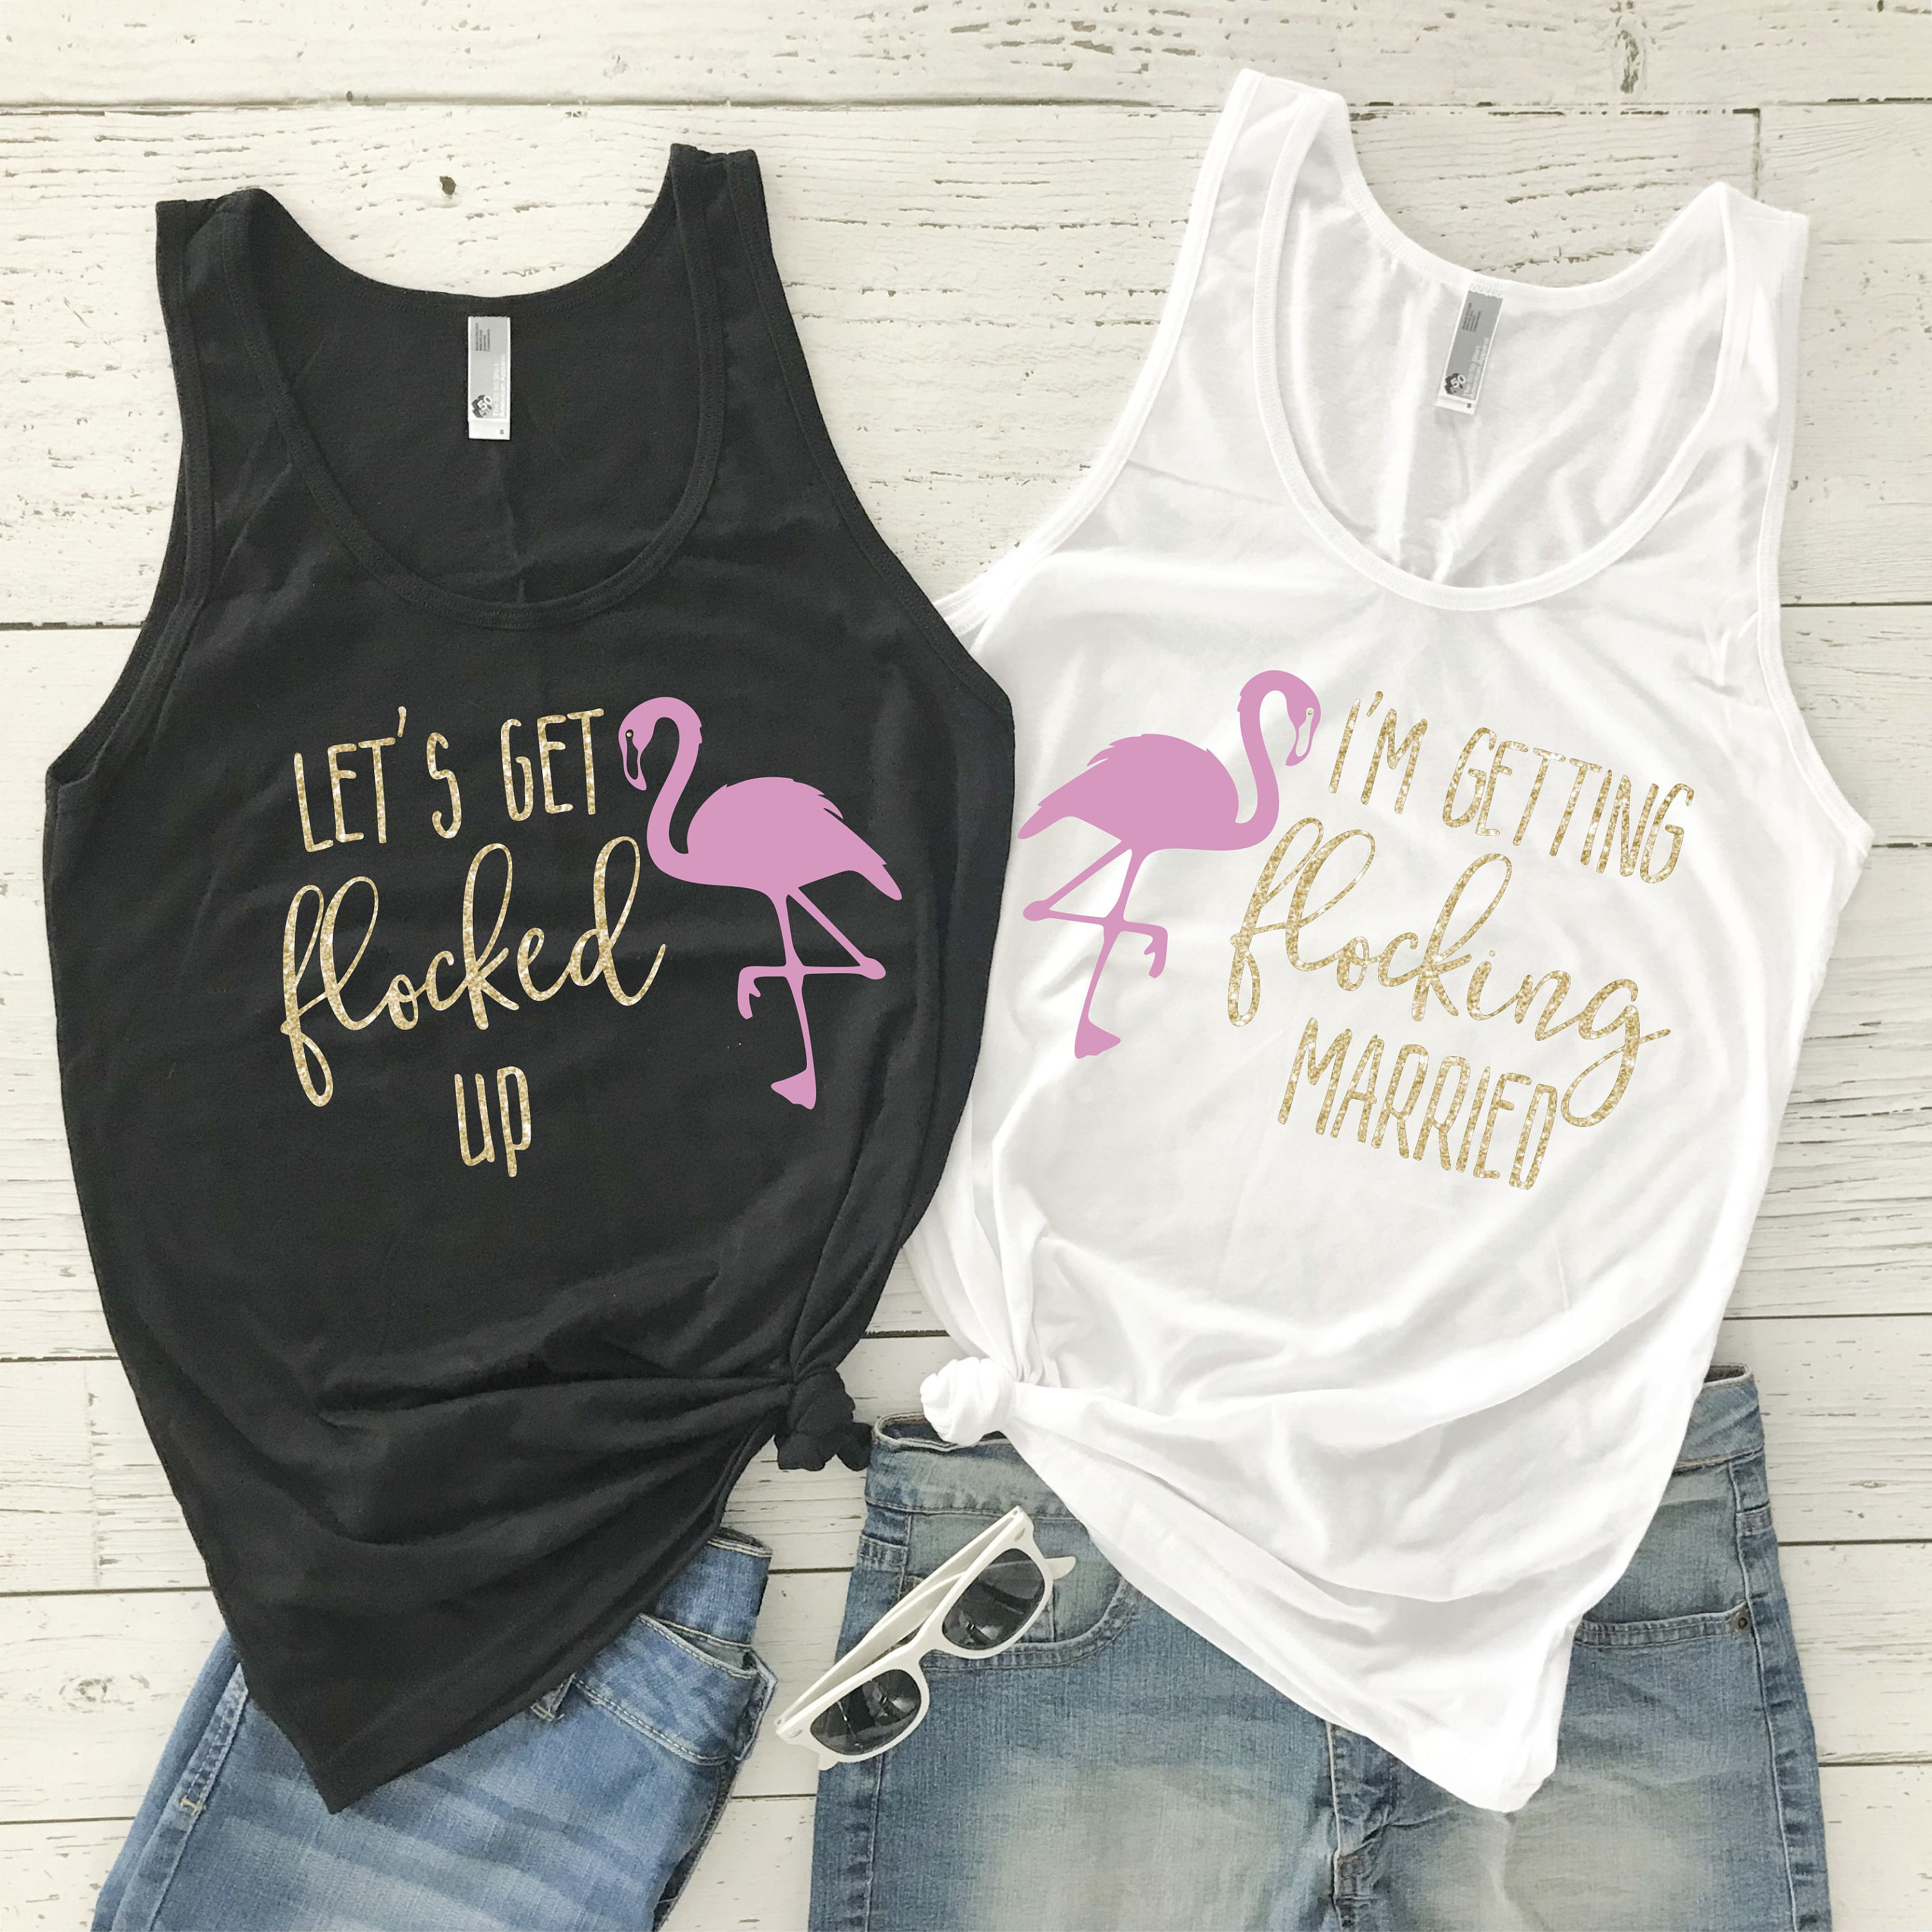 Flamingo Bachelorette Party Shirts Let's Get Flocked Up Tank I'm Getting  Flocking Married Bridal Party Shirts Flamingo Bridesmaid - Etsy Österreich